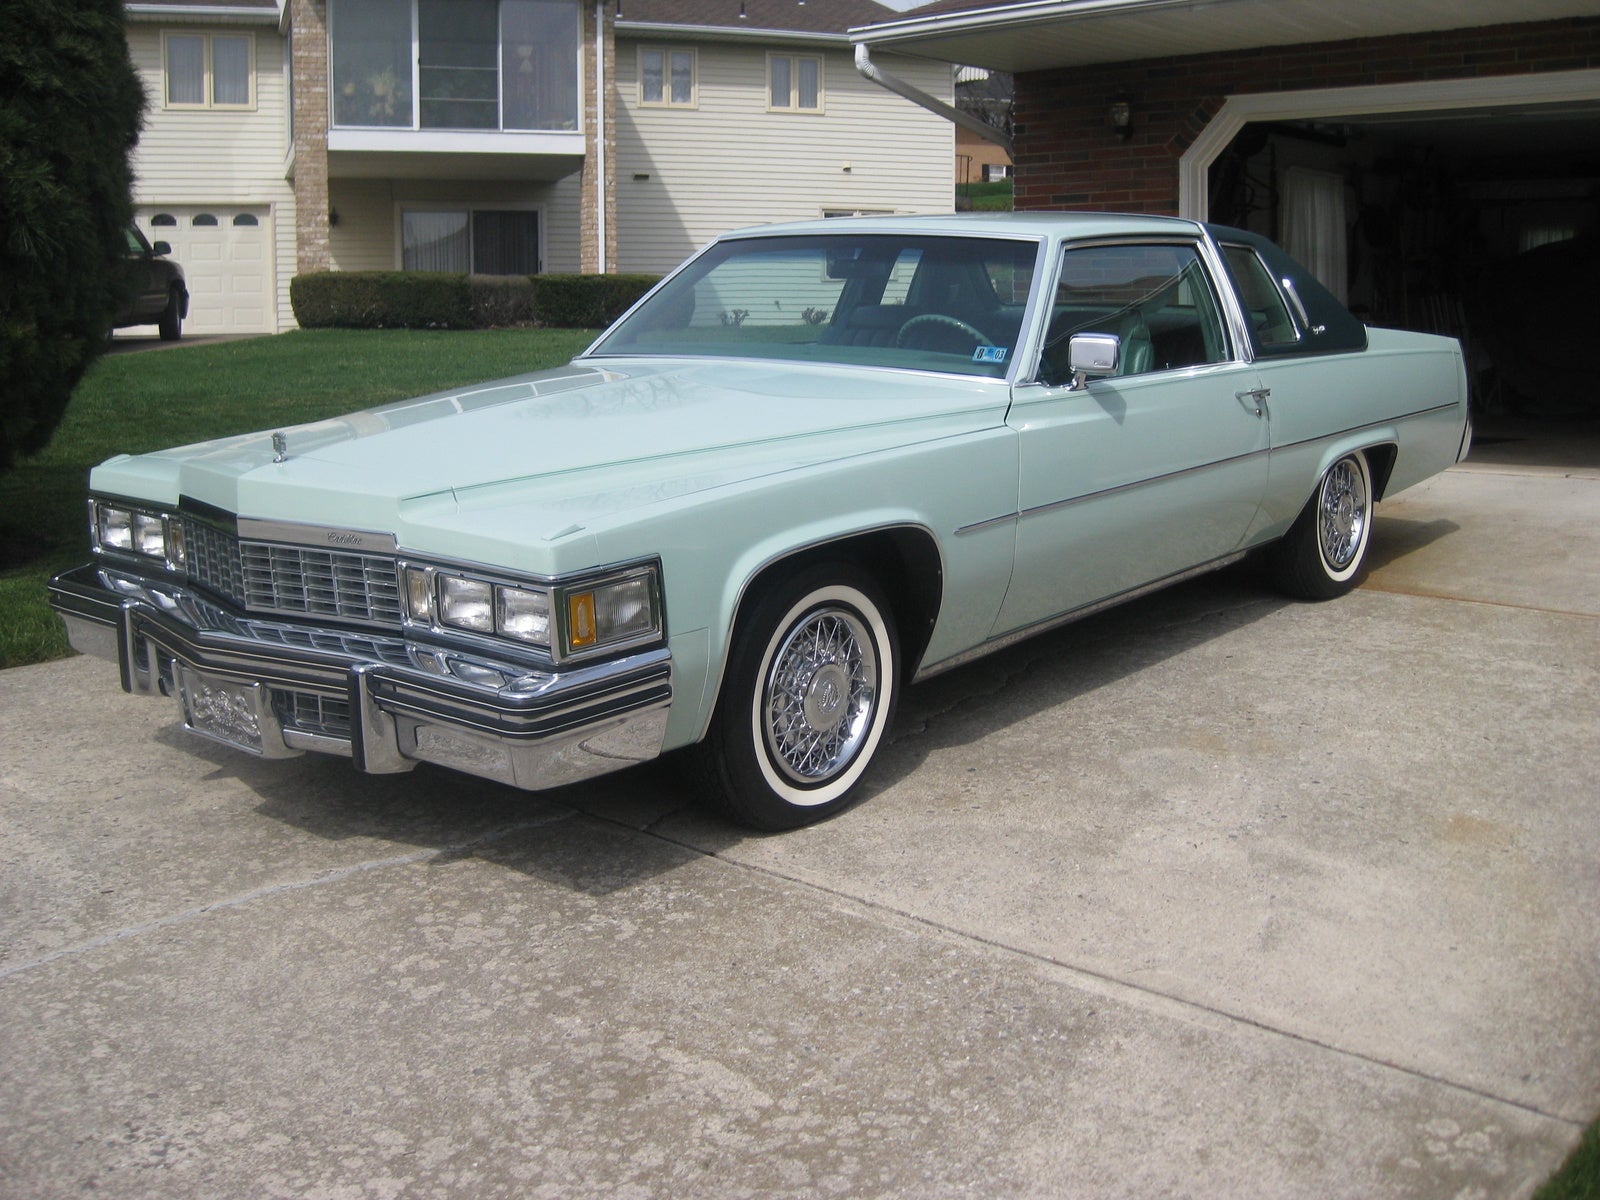 1977 Cadillac DeVille - Pictures - Picture of 1977 Cadillac DeVil ...